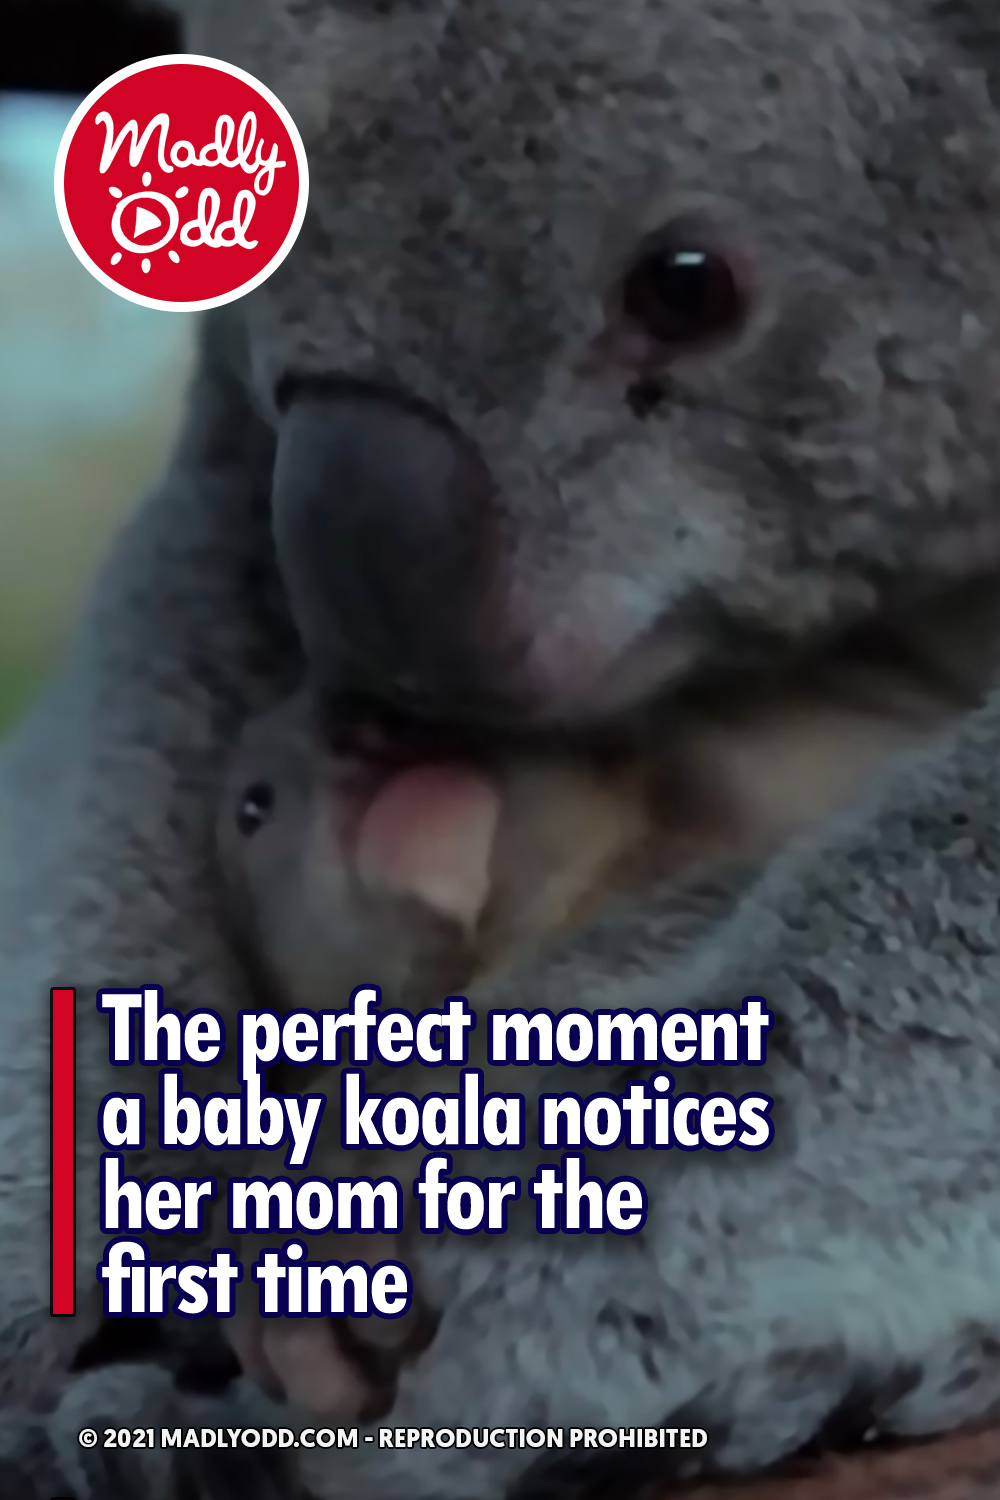 The perfect moment a baby koala notices her mom for the first time